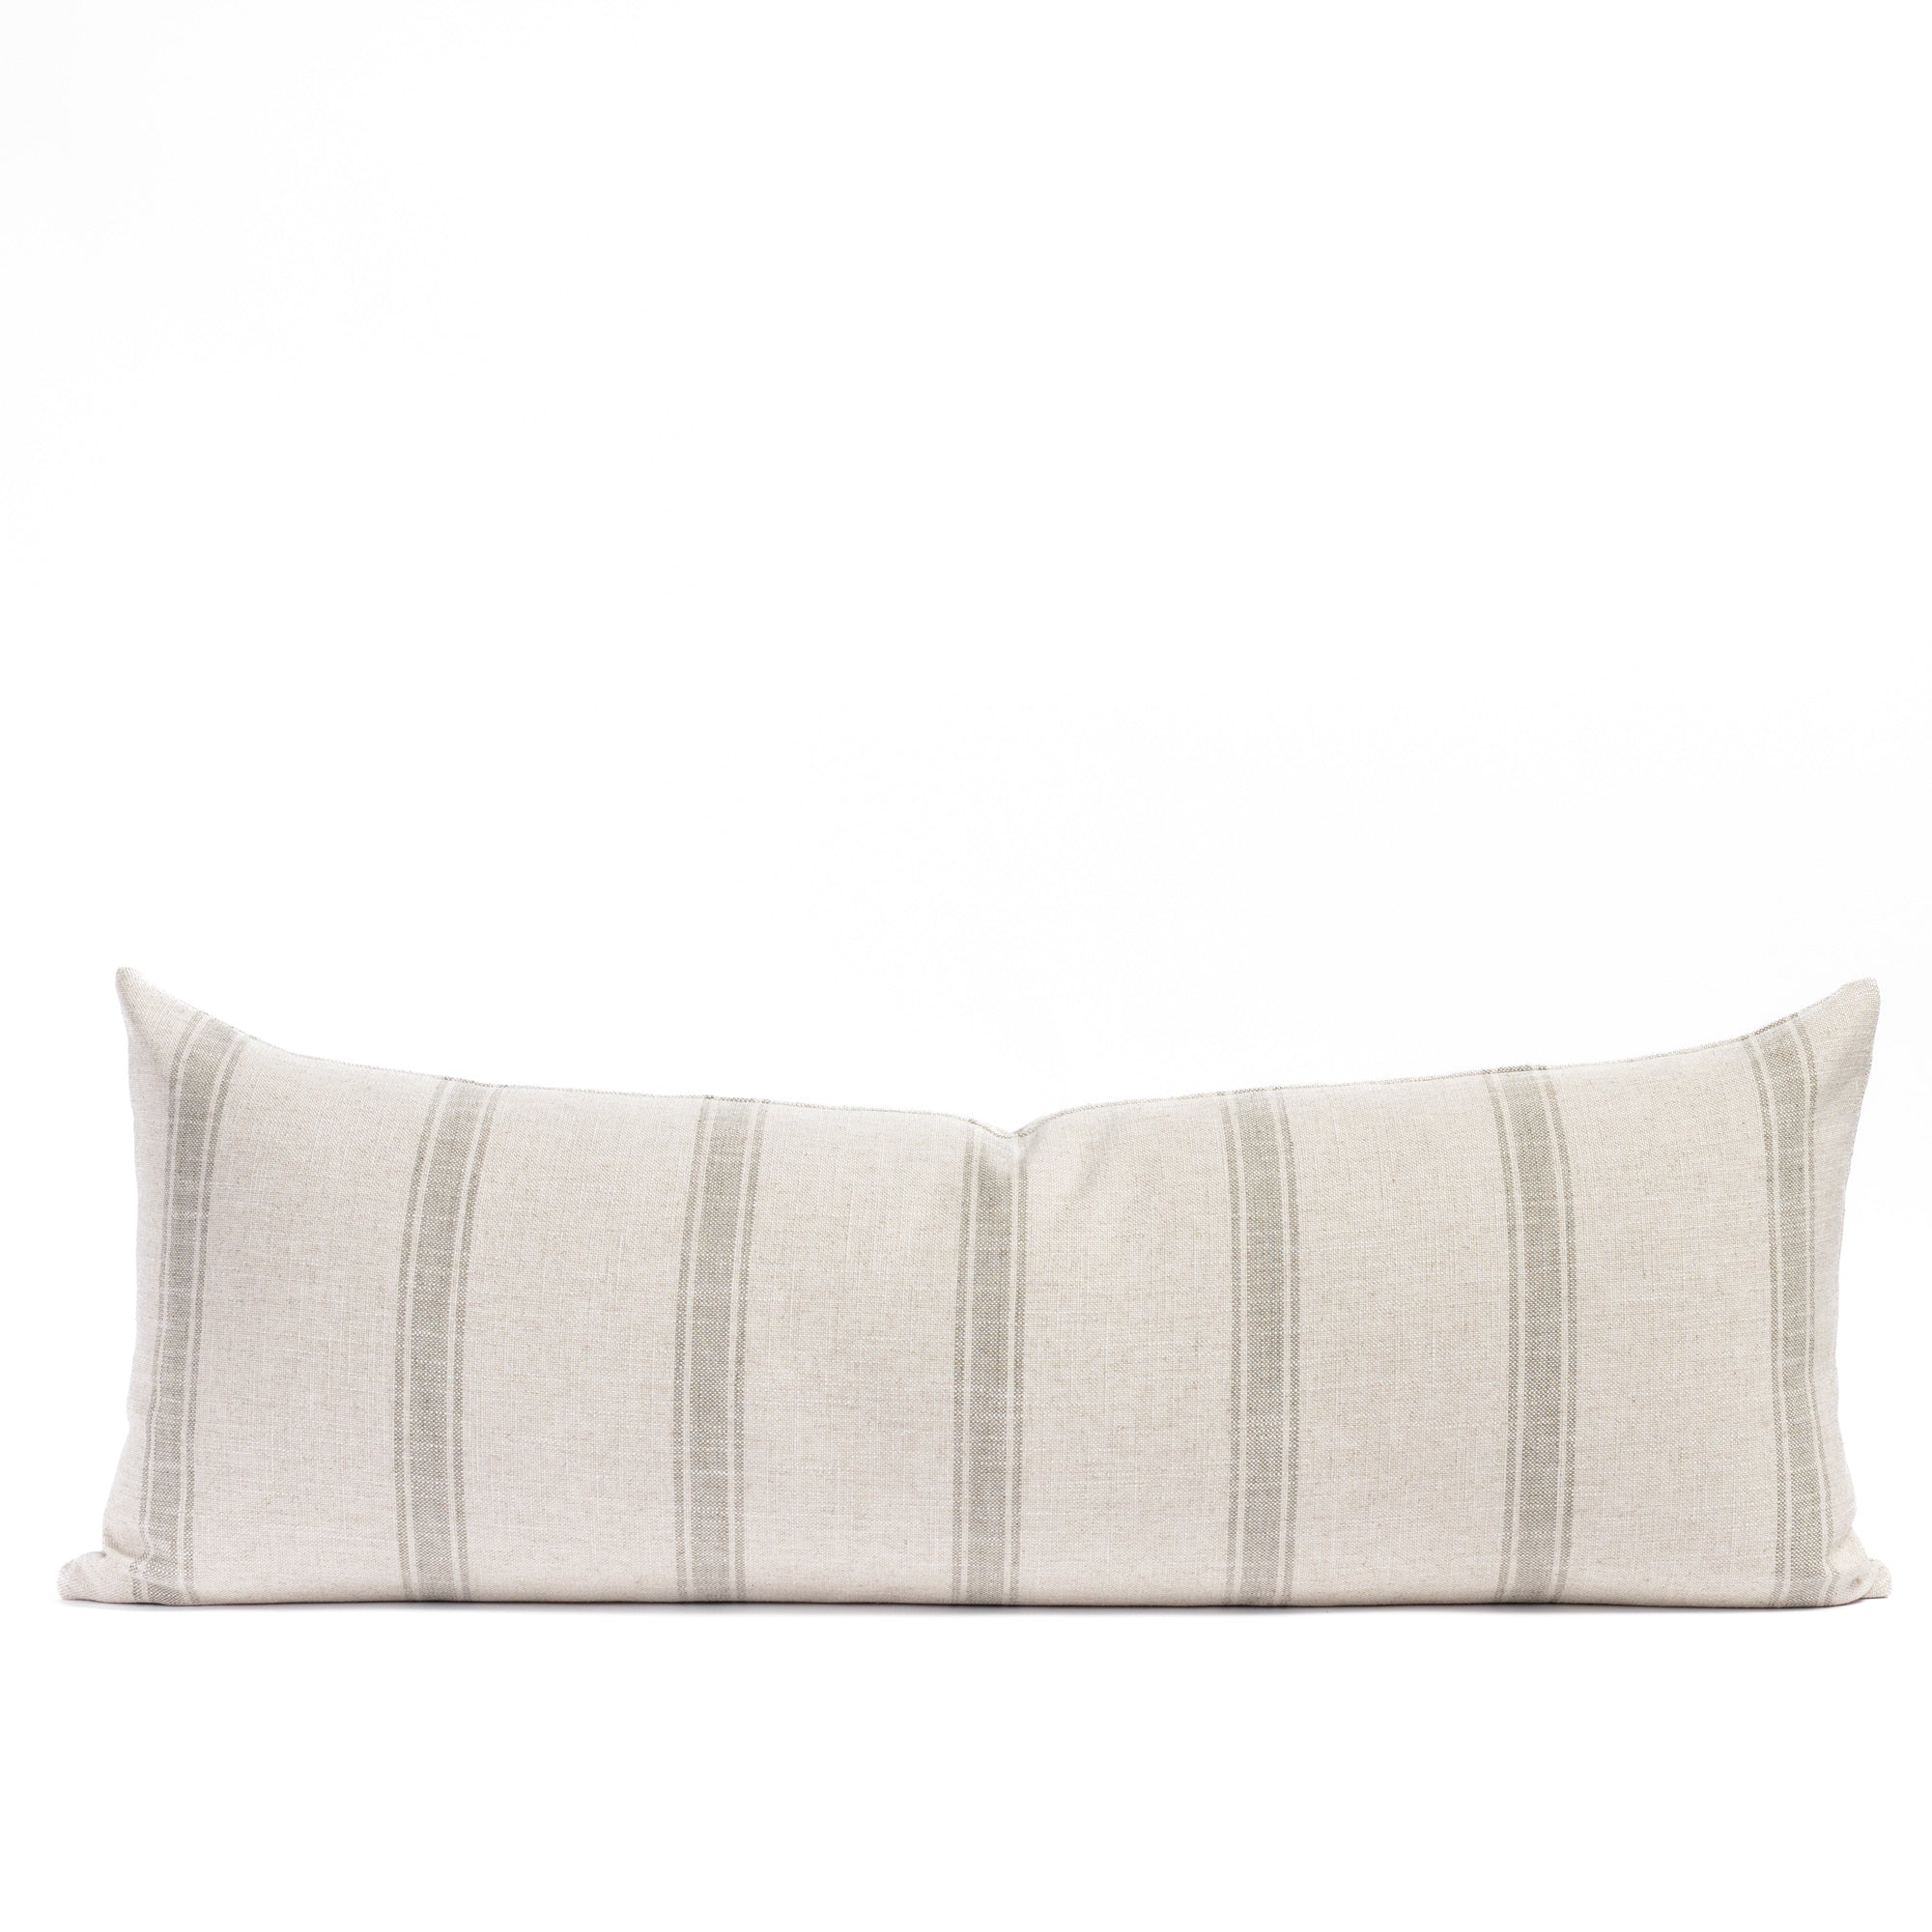 Great Quality at Low Prices Tonic Living Pillows - Throw Pillows